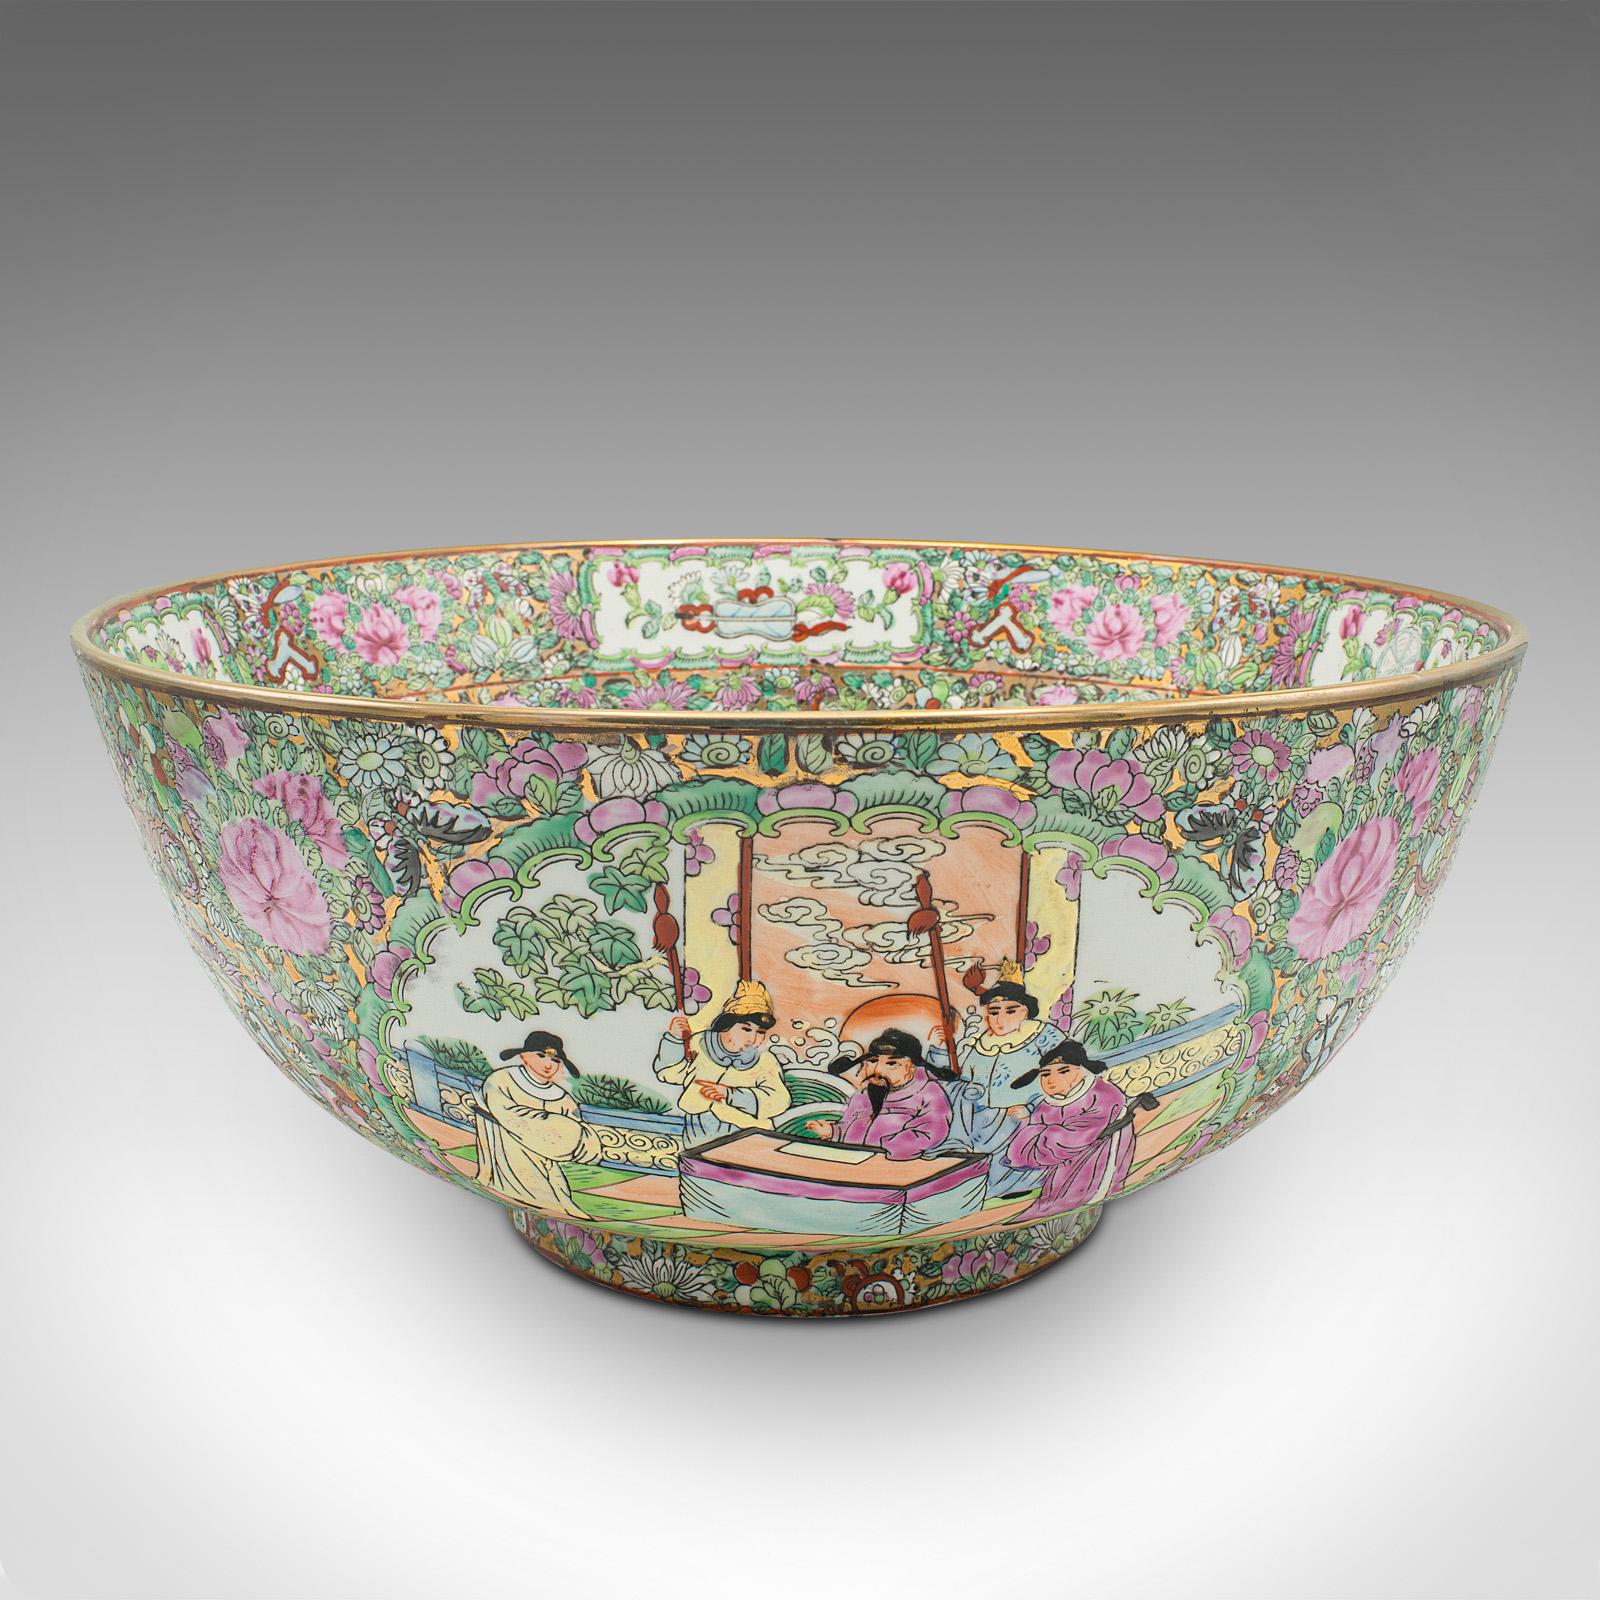 This is a large antique banquet bowl. A Chinese, ceramic serving dish, dating to the late Victorian period, circa 1900.

Imposing bowl, with exceptional decorative appeal.
Displays a desirable aged patina and in good original order.
Abundance of